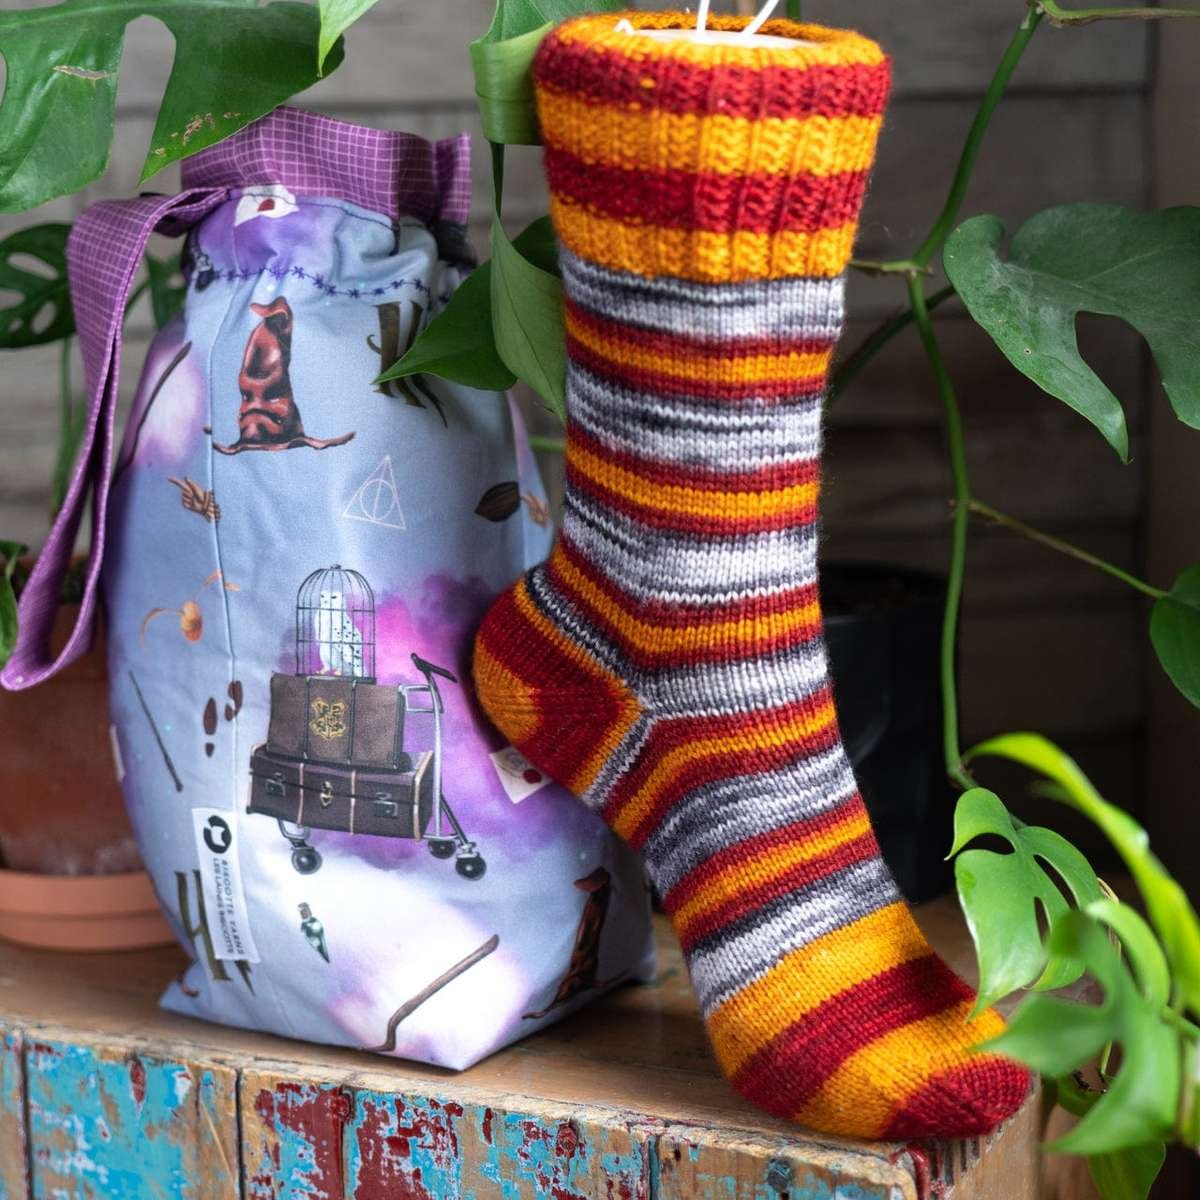 Harry potter yarns, patterns, knitting kits and products